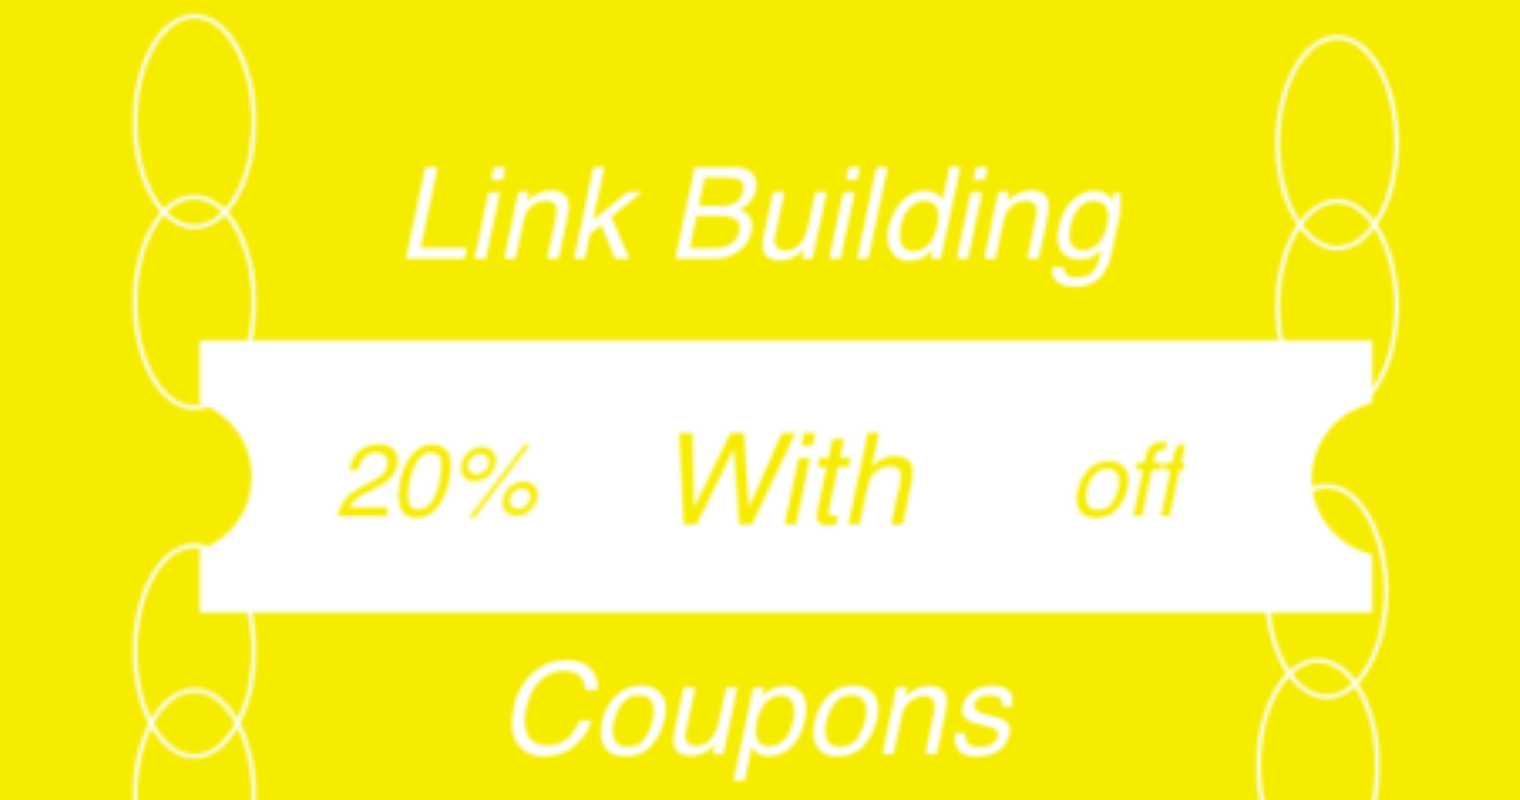 Coupon Link Building for Ecommerce: A Step-by-Step Guide